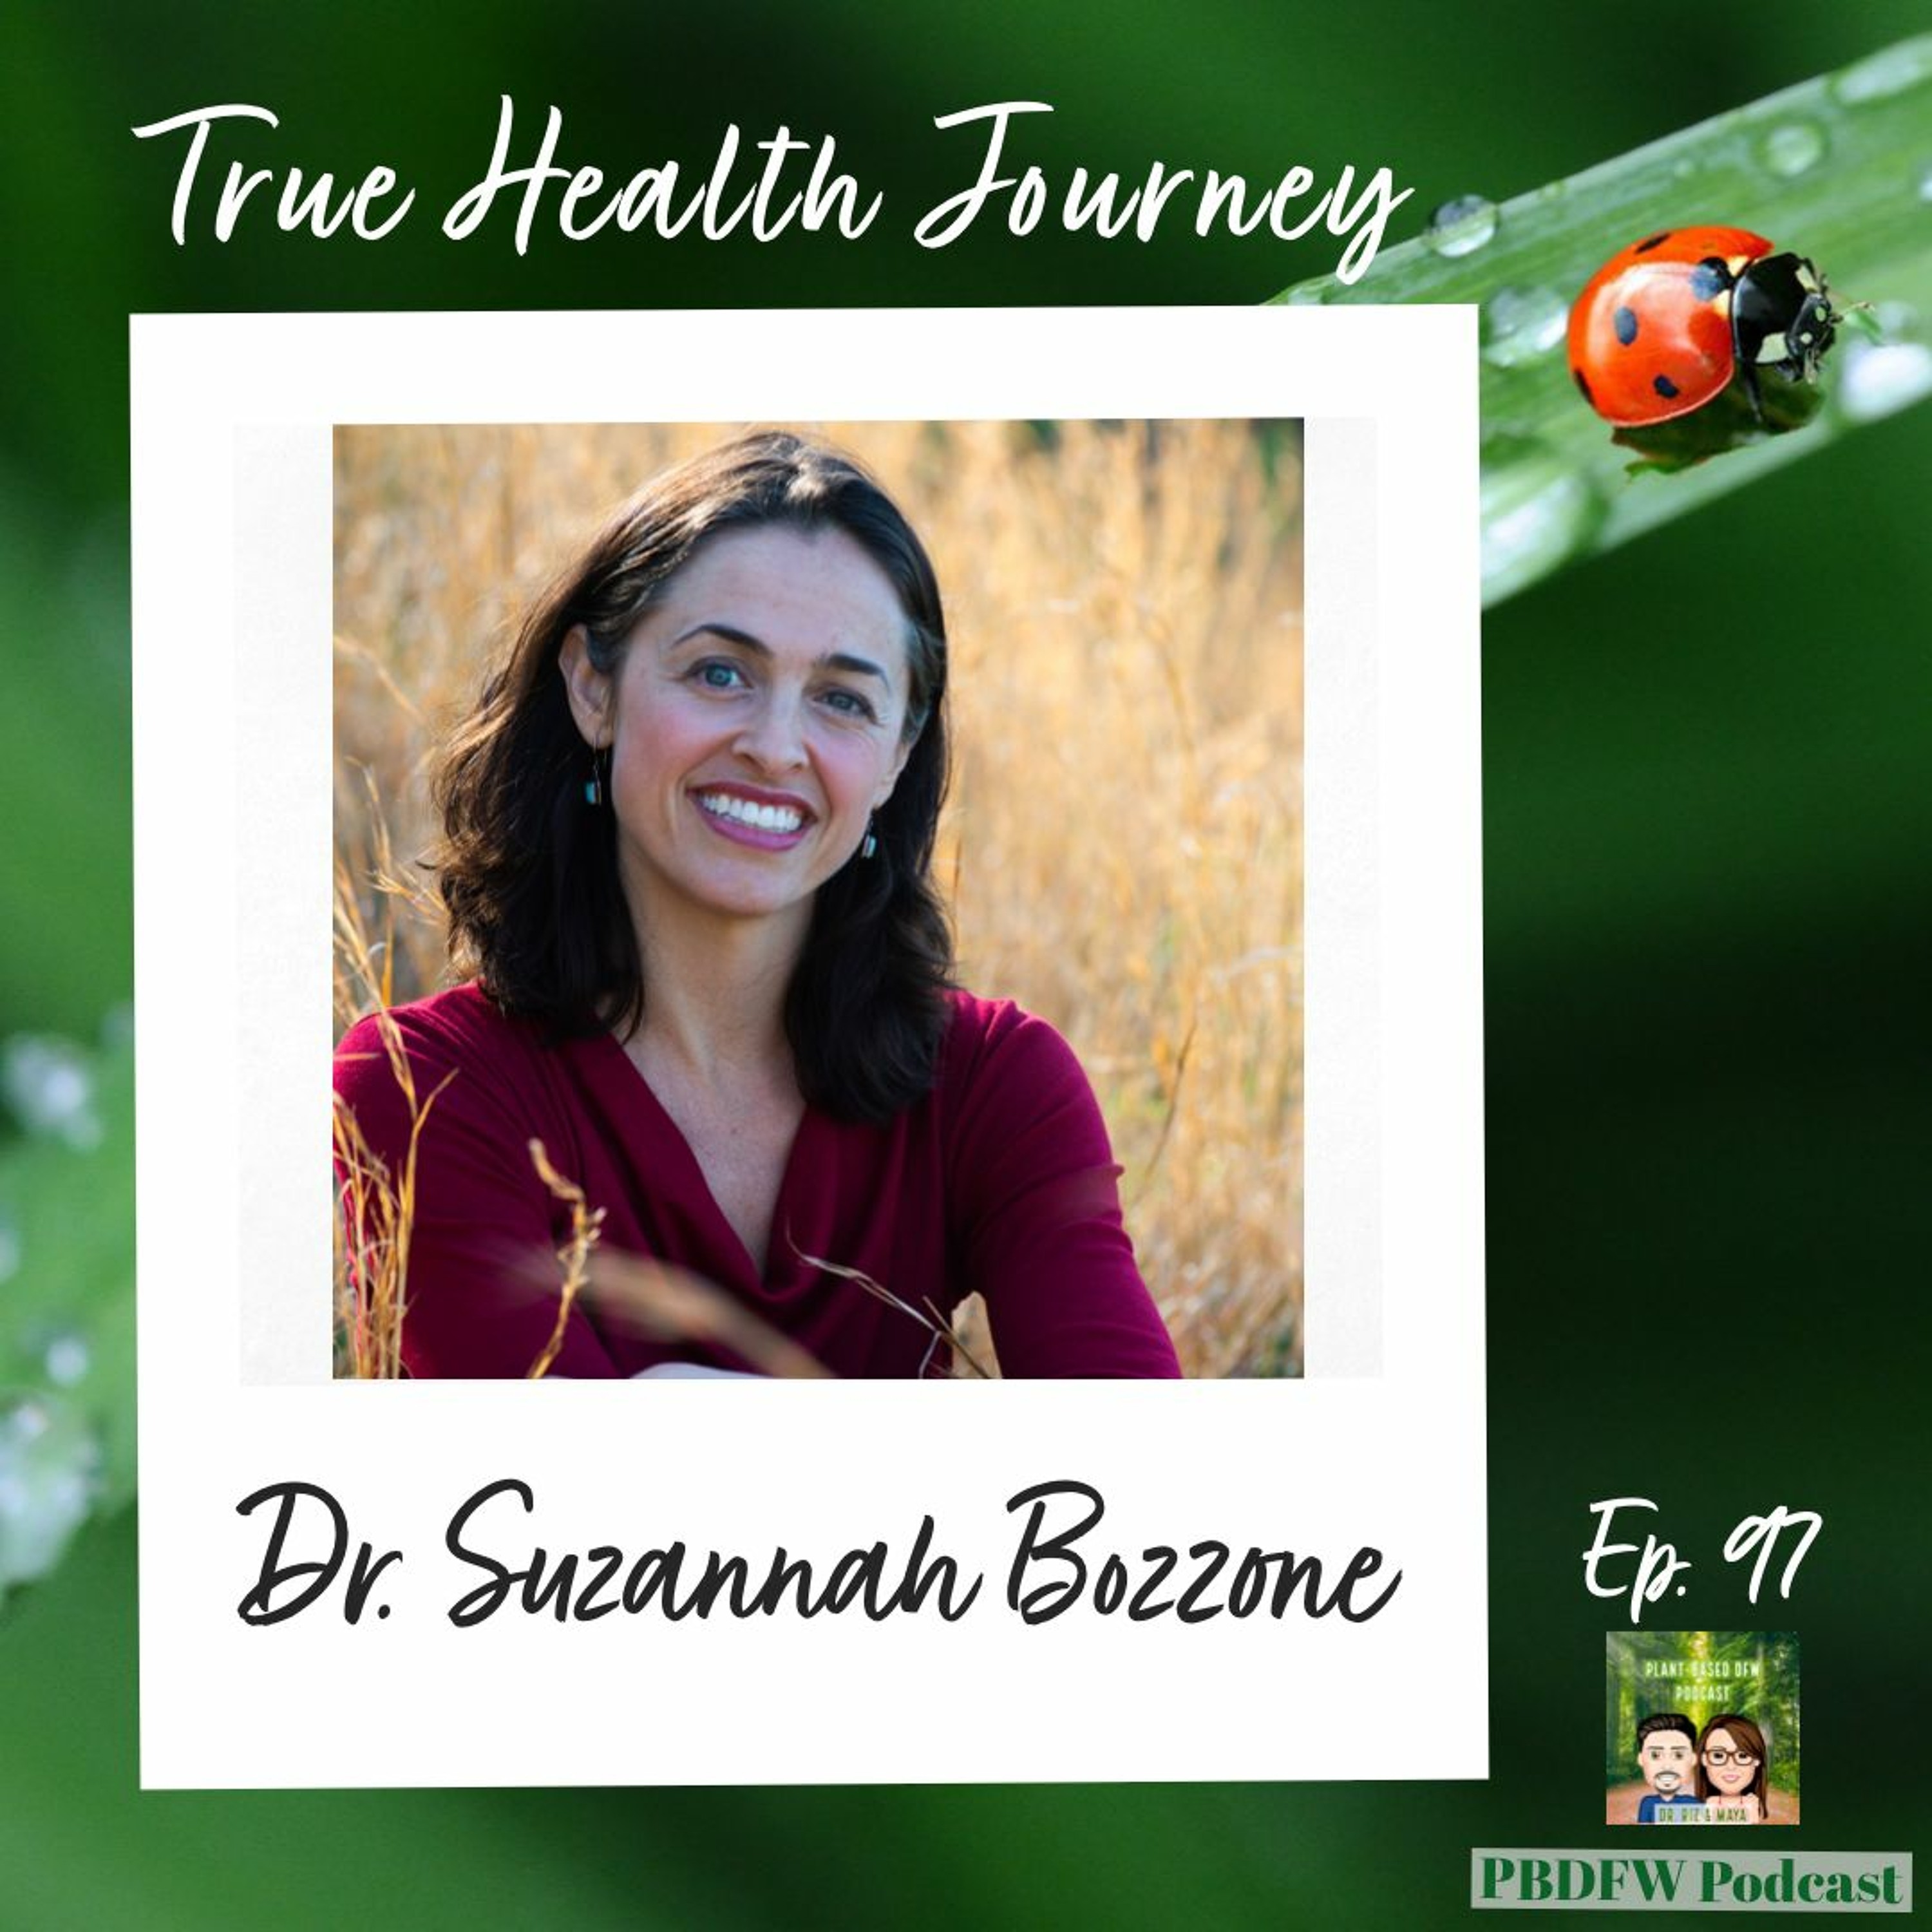 97: Empowering Patients Through A Sense of Community | Dr Suzannah Bozzone Image